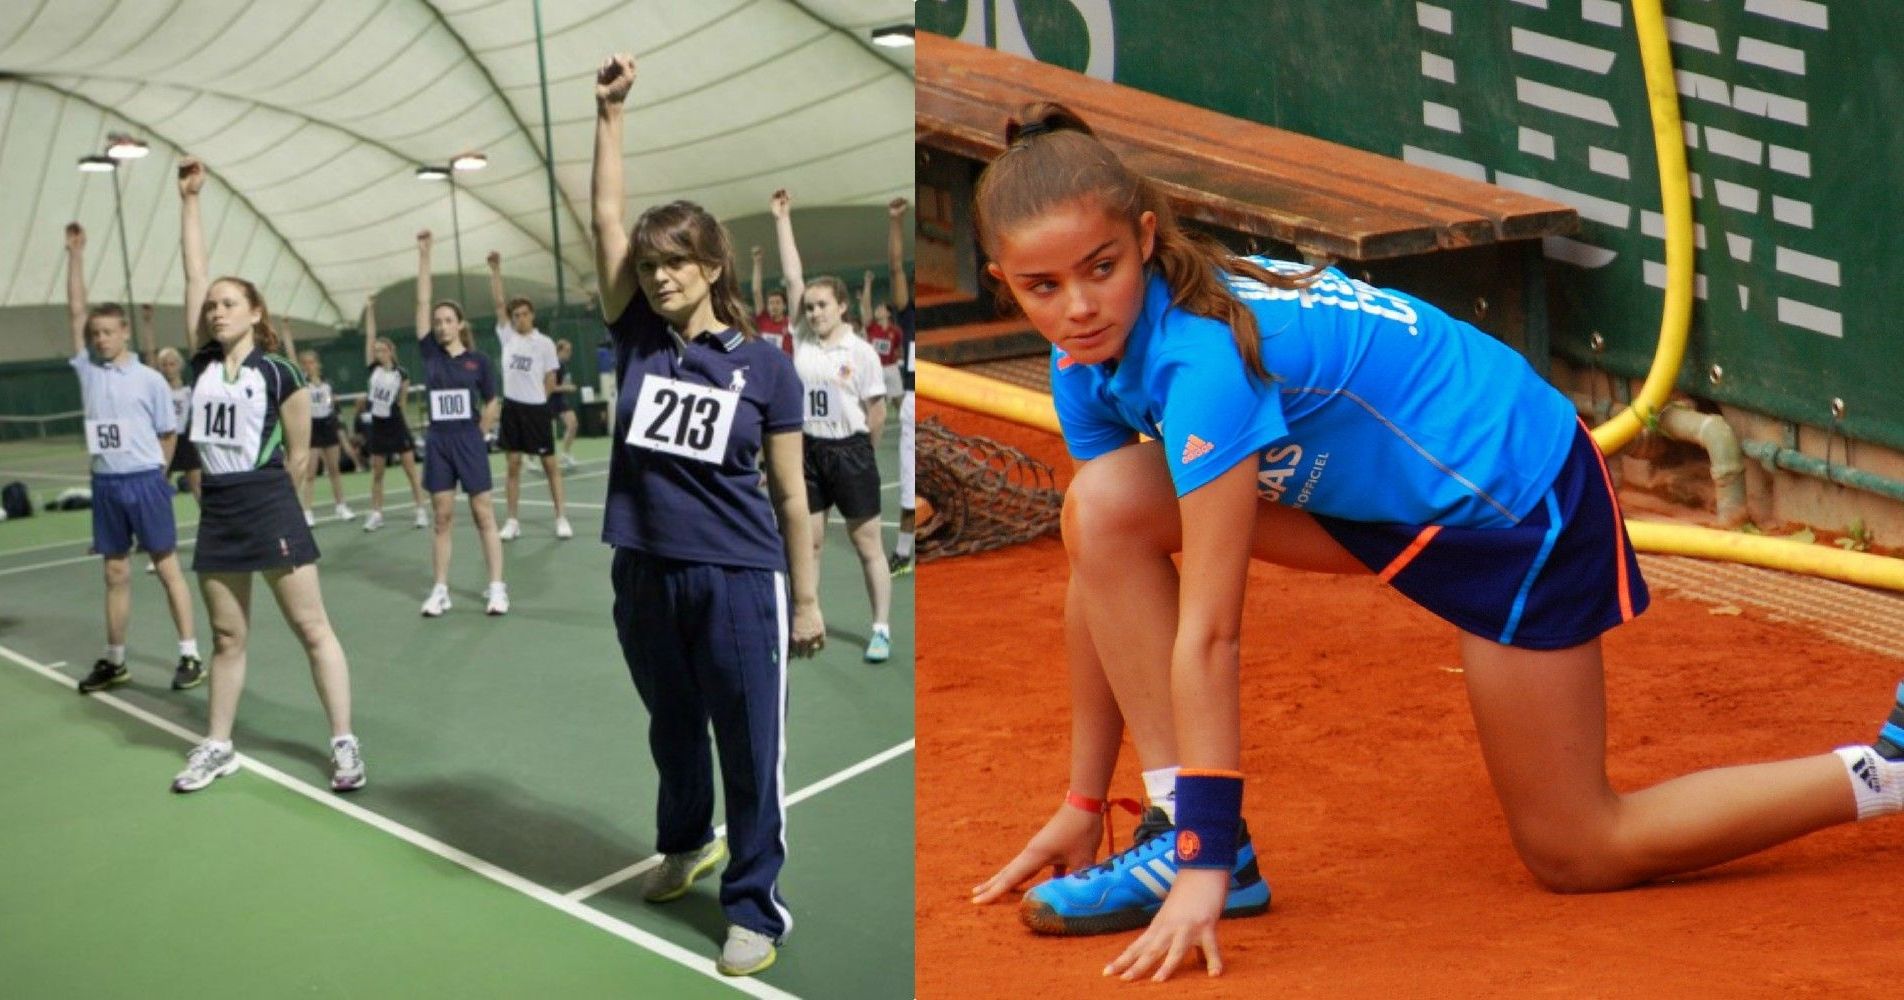 Ever Wondered How Ball Boys And Girls Are So Quick On The Tennis Court